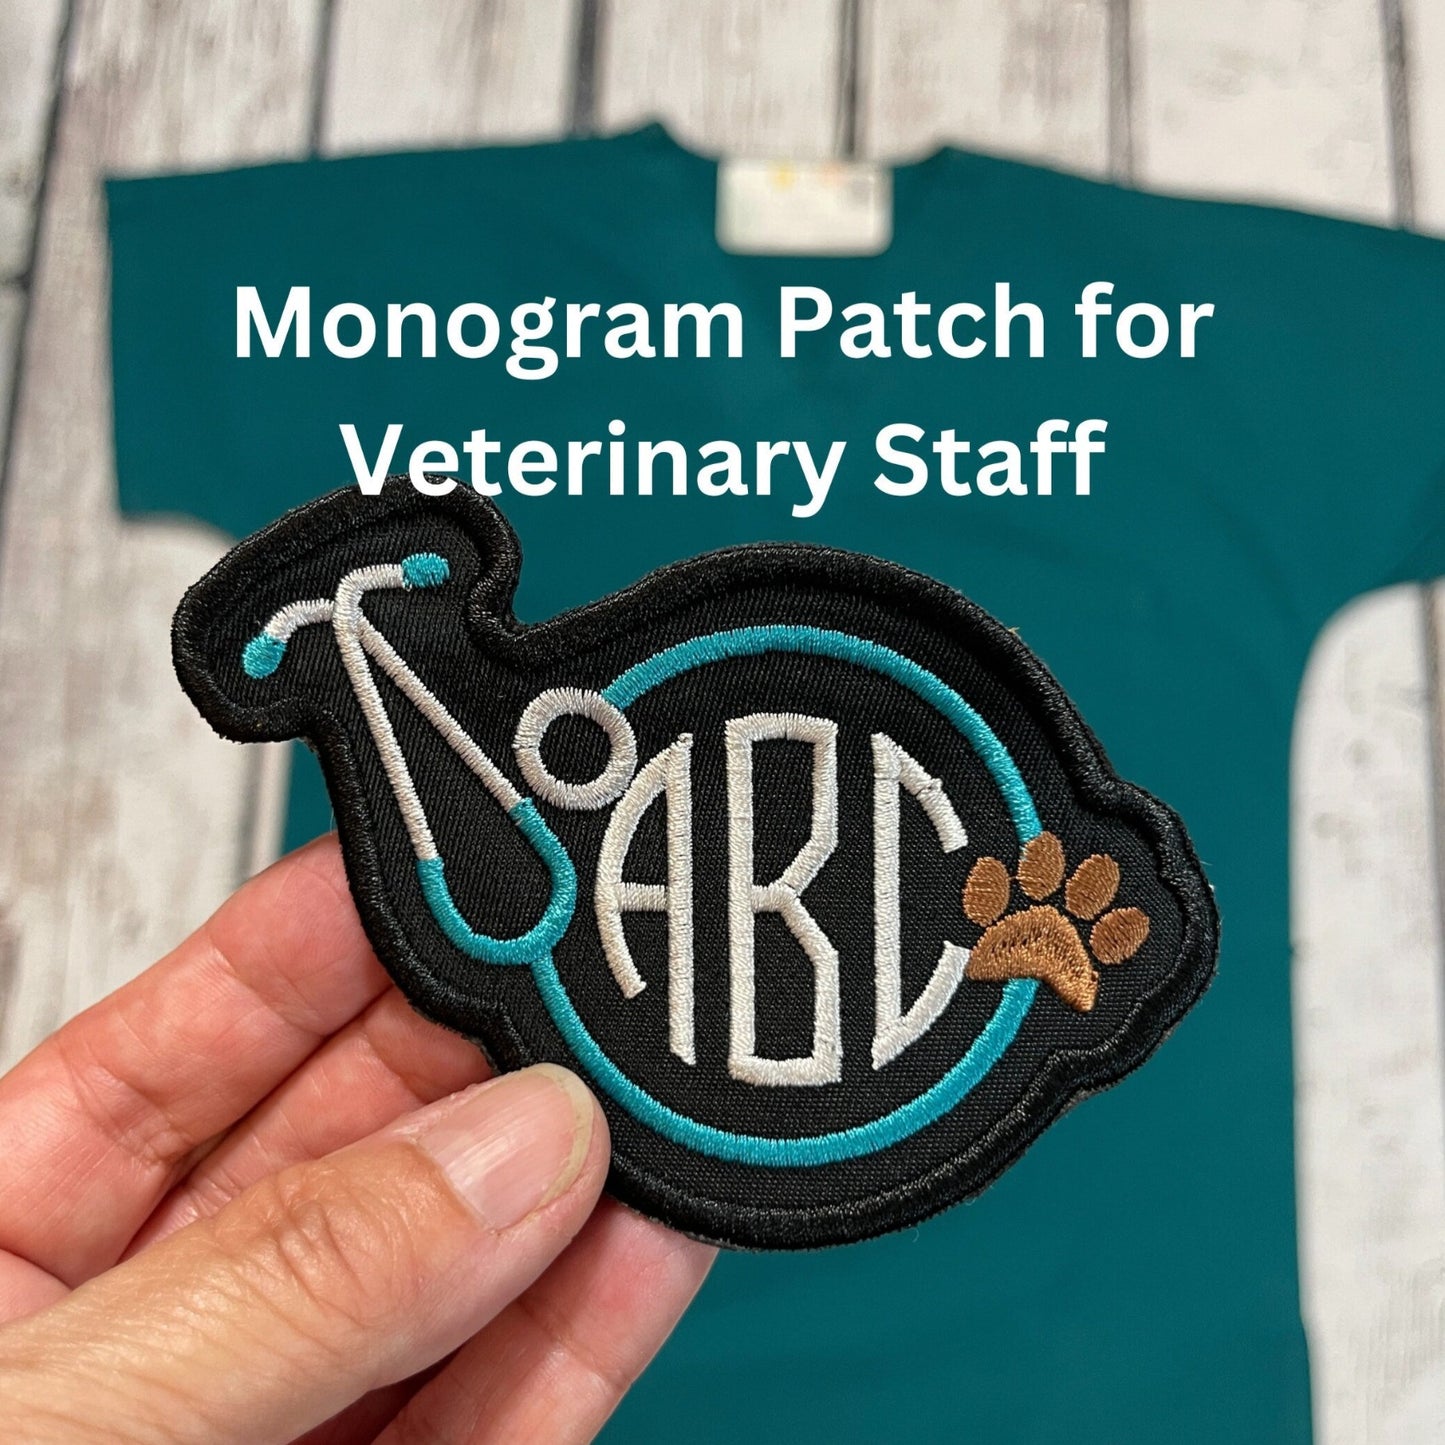 Veterinarian staff monogram patch with paw print and stethoscope